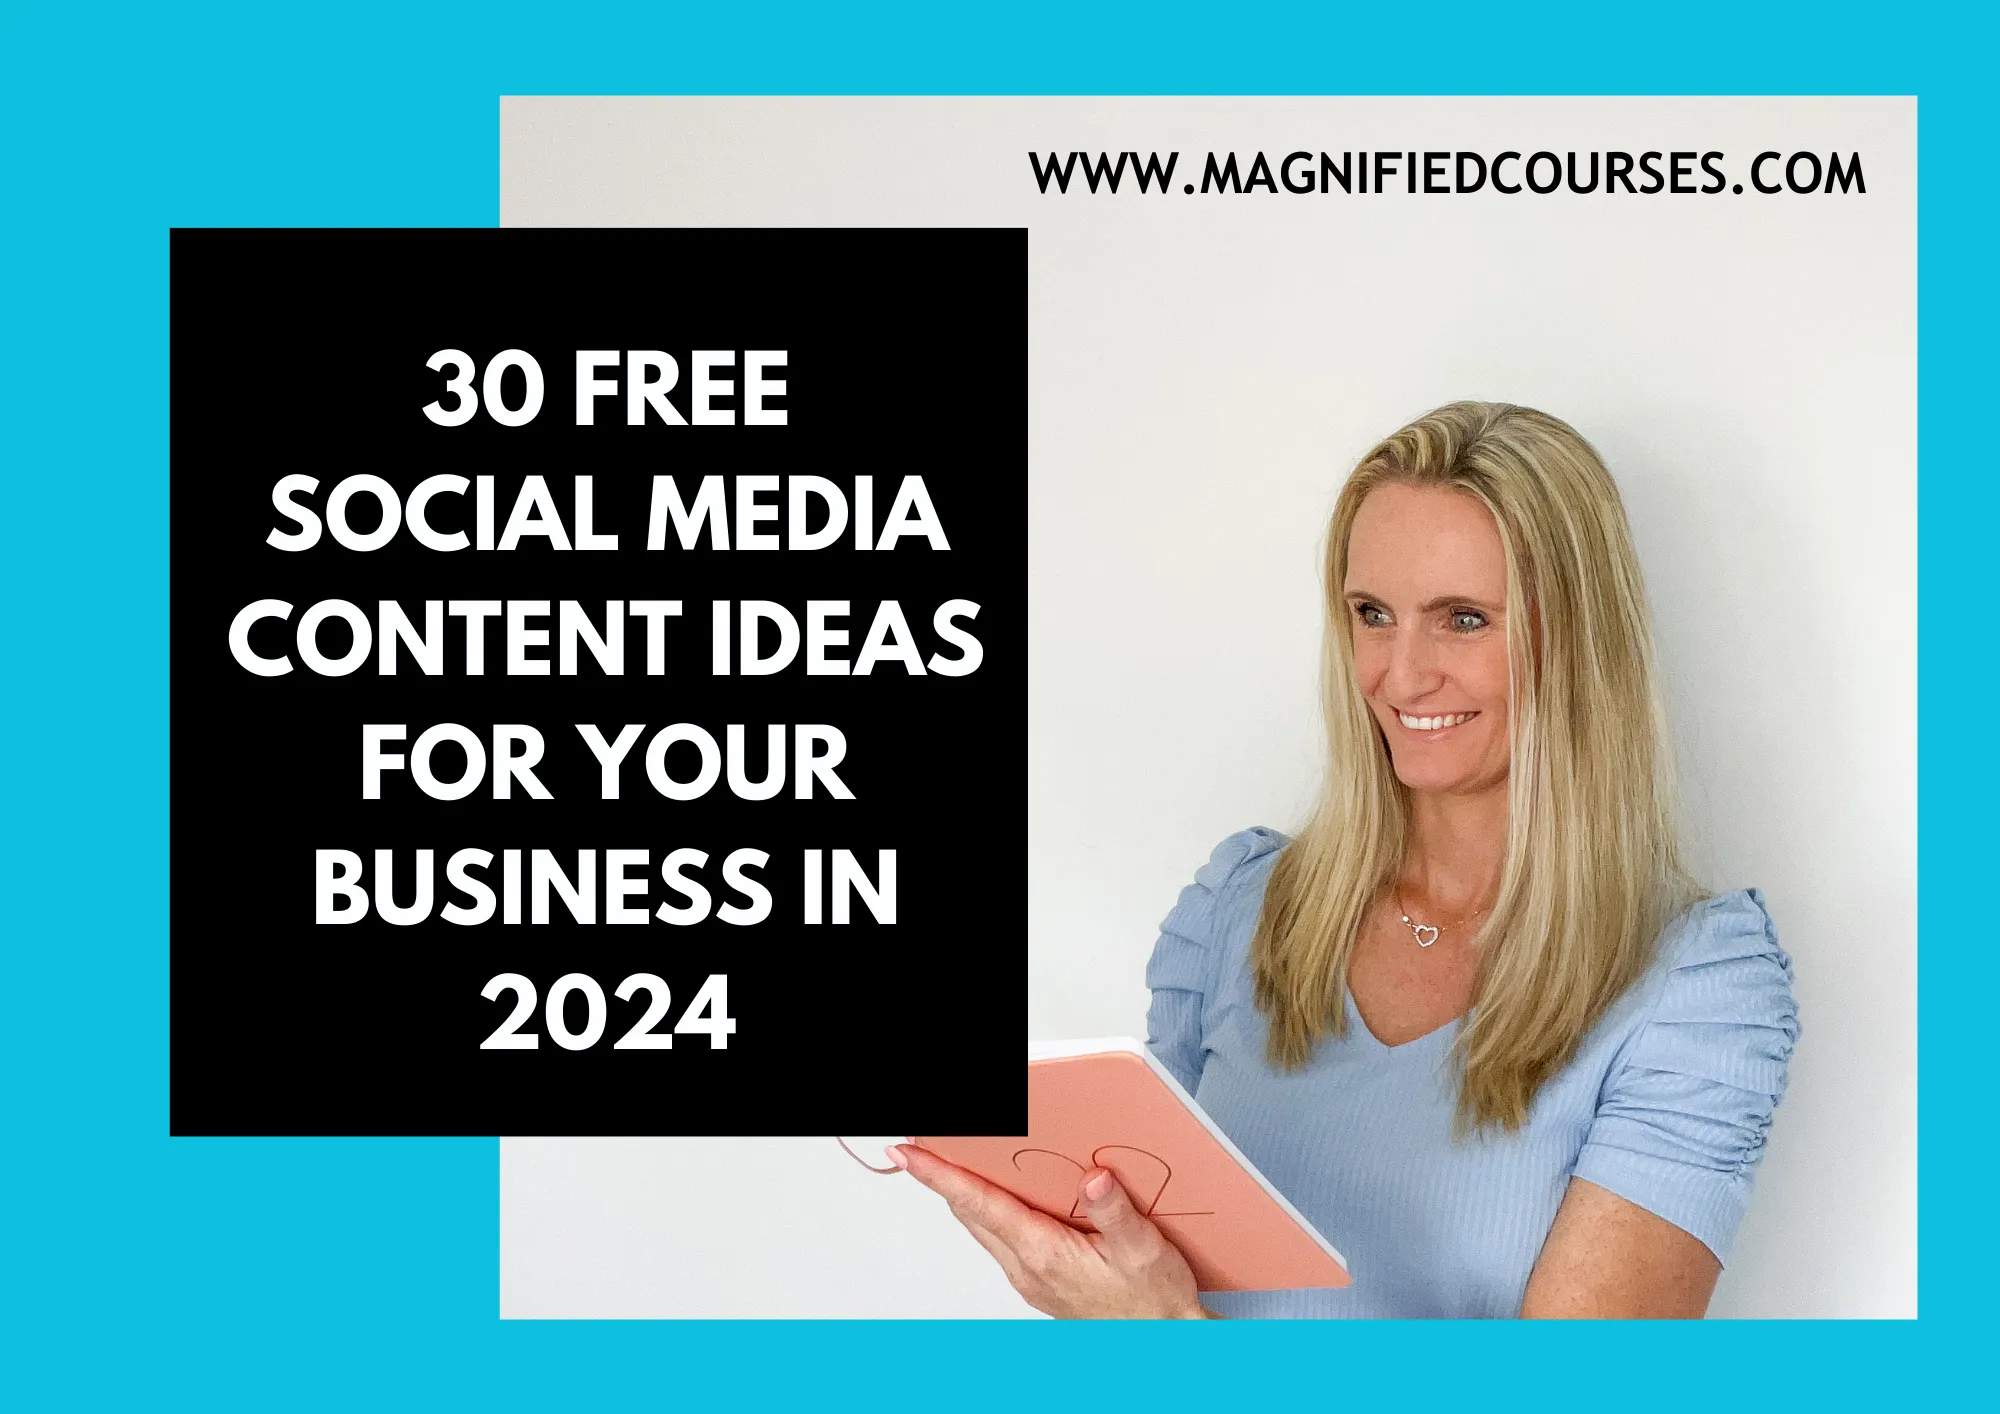 30 free social media marketing content ideas for small businesses